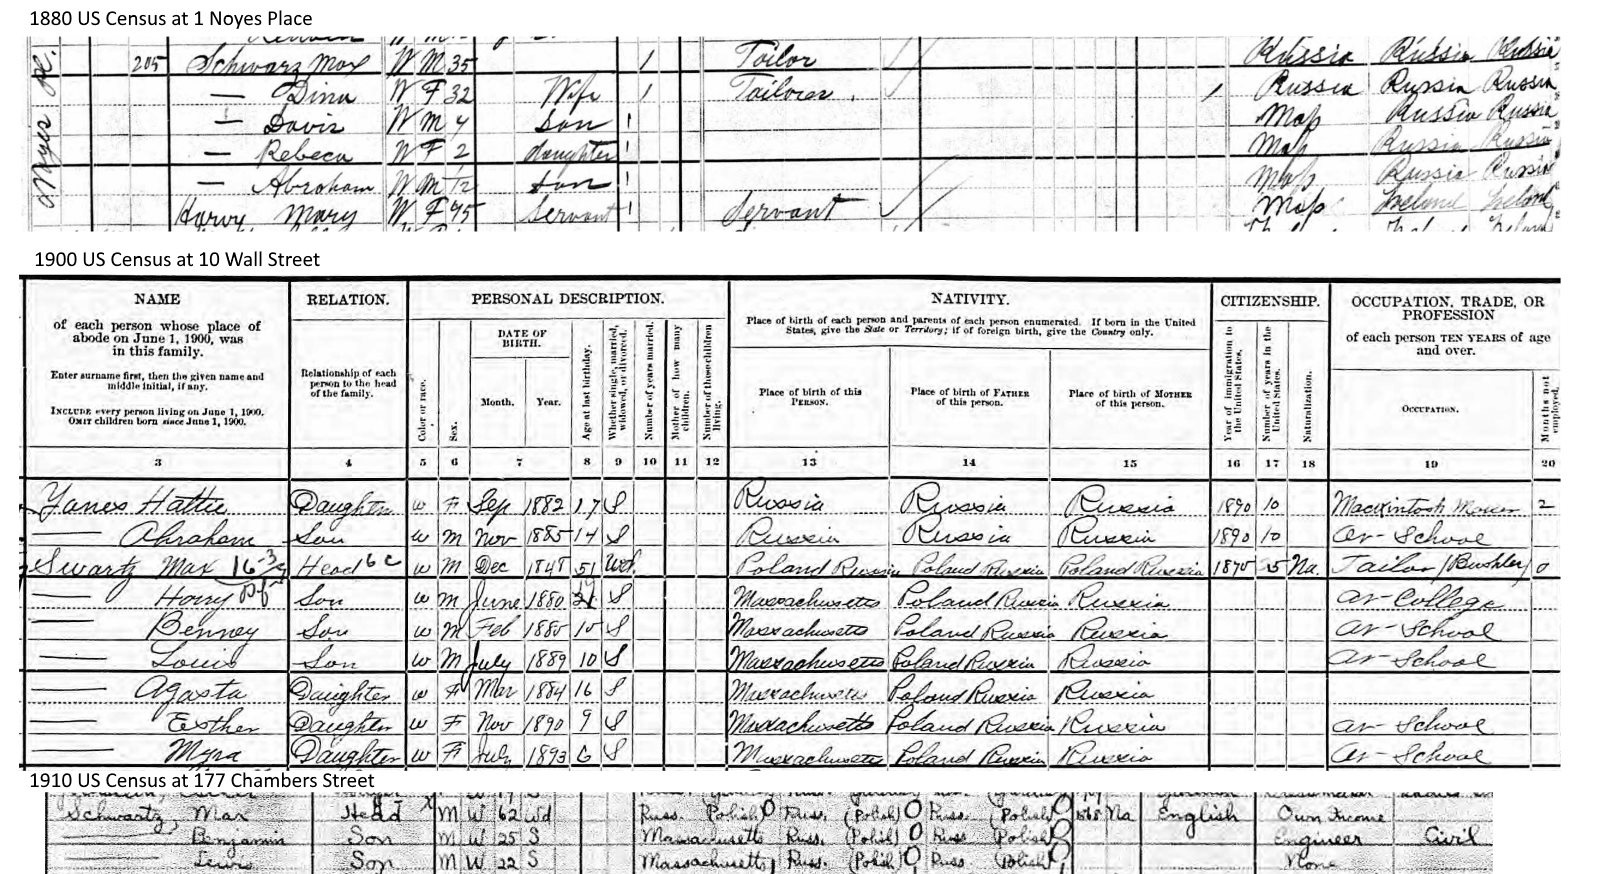 1880 to 1910 Censuses for Family of Max & Anna Schwartz